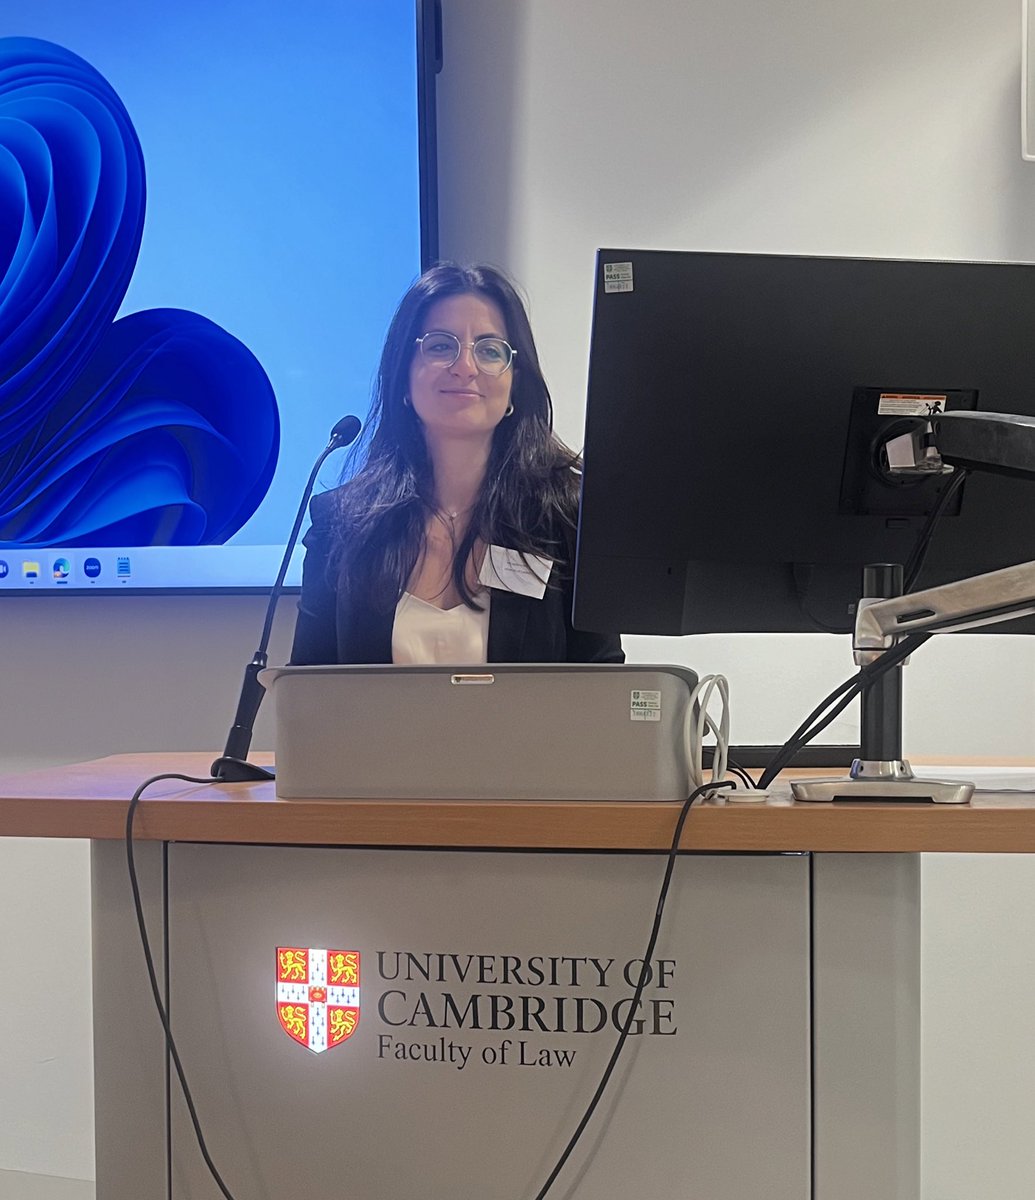 I am grateful and honored I had the chance to discuss my research on Effective #Judicial Protection in Dublin regulation reform at the @EHRLC23 organized by @cambridgelaw!